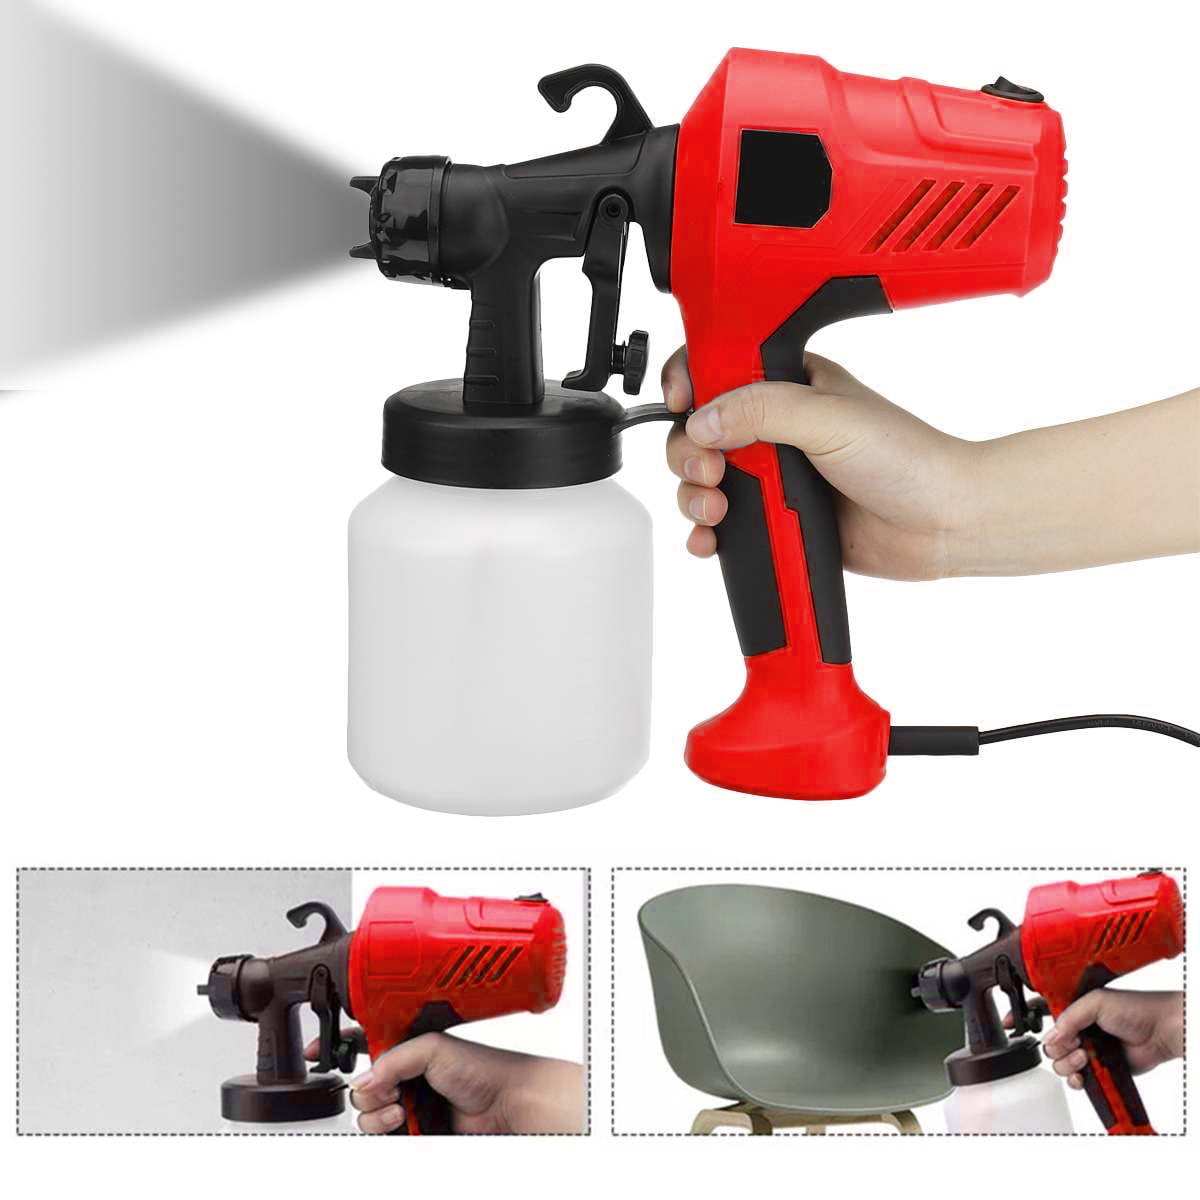 Silverstorm 500W Hvlp Paint Sprayer Power Tools Cleaning & Decorating Silverline 